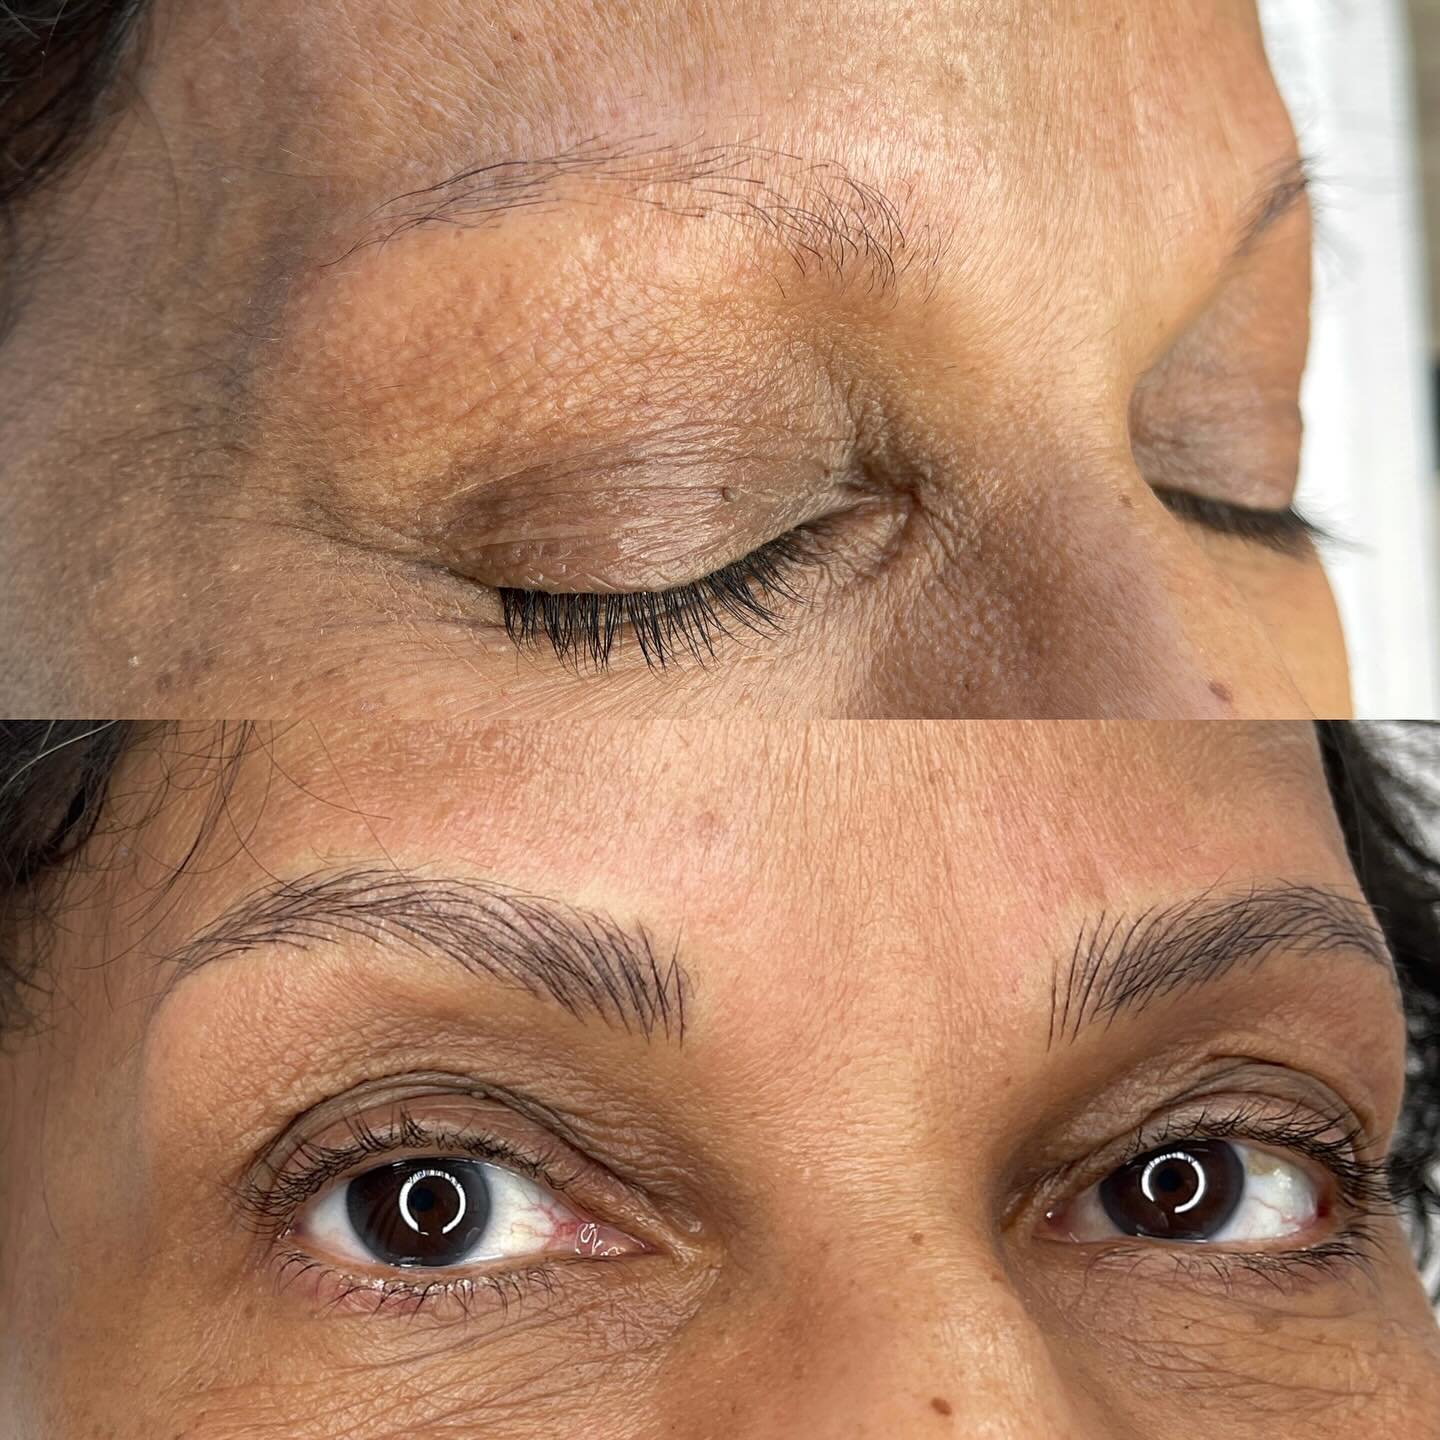 &hearts;️Before/After Microblading second session of building these natural brows on mature skin. 

&bull;
&bull;
&bull;

#brows #nycbrows #microblading #cosmetictattoo #cosmetictattoos #cosmetictattooing #browgoals #microbladingartist #microbladingn